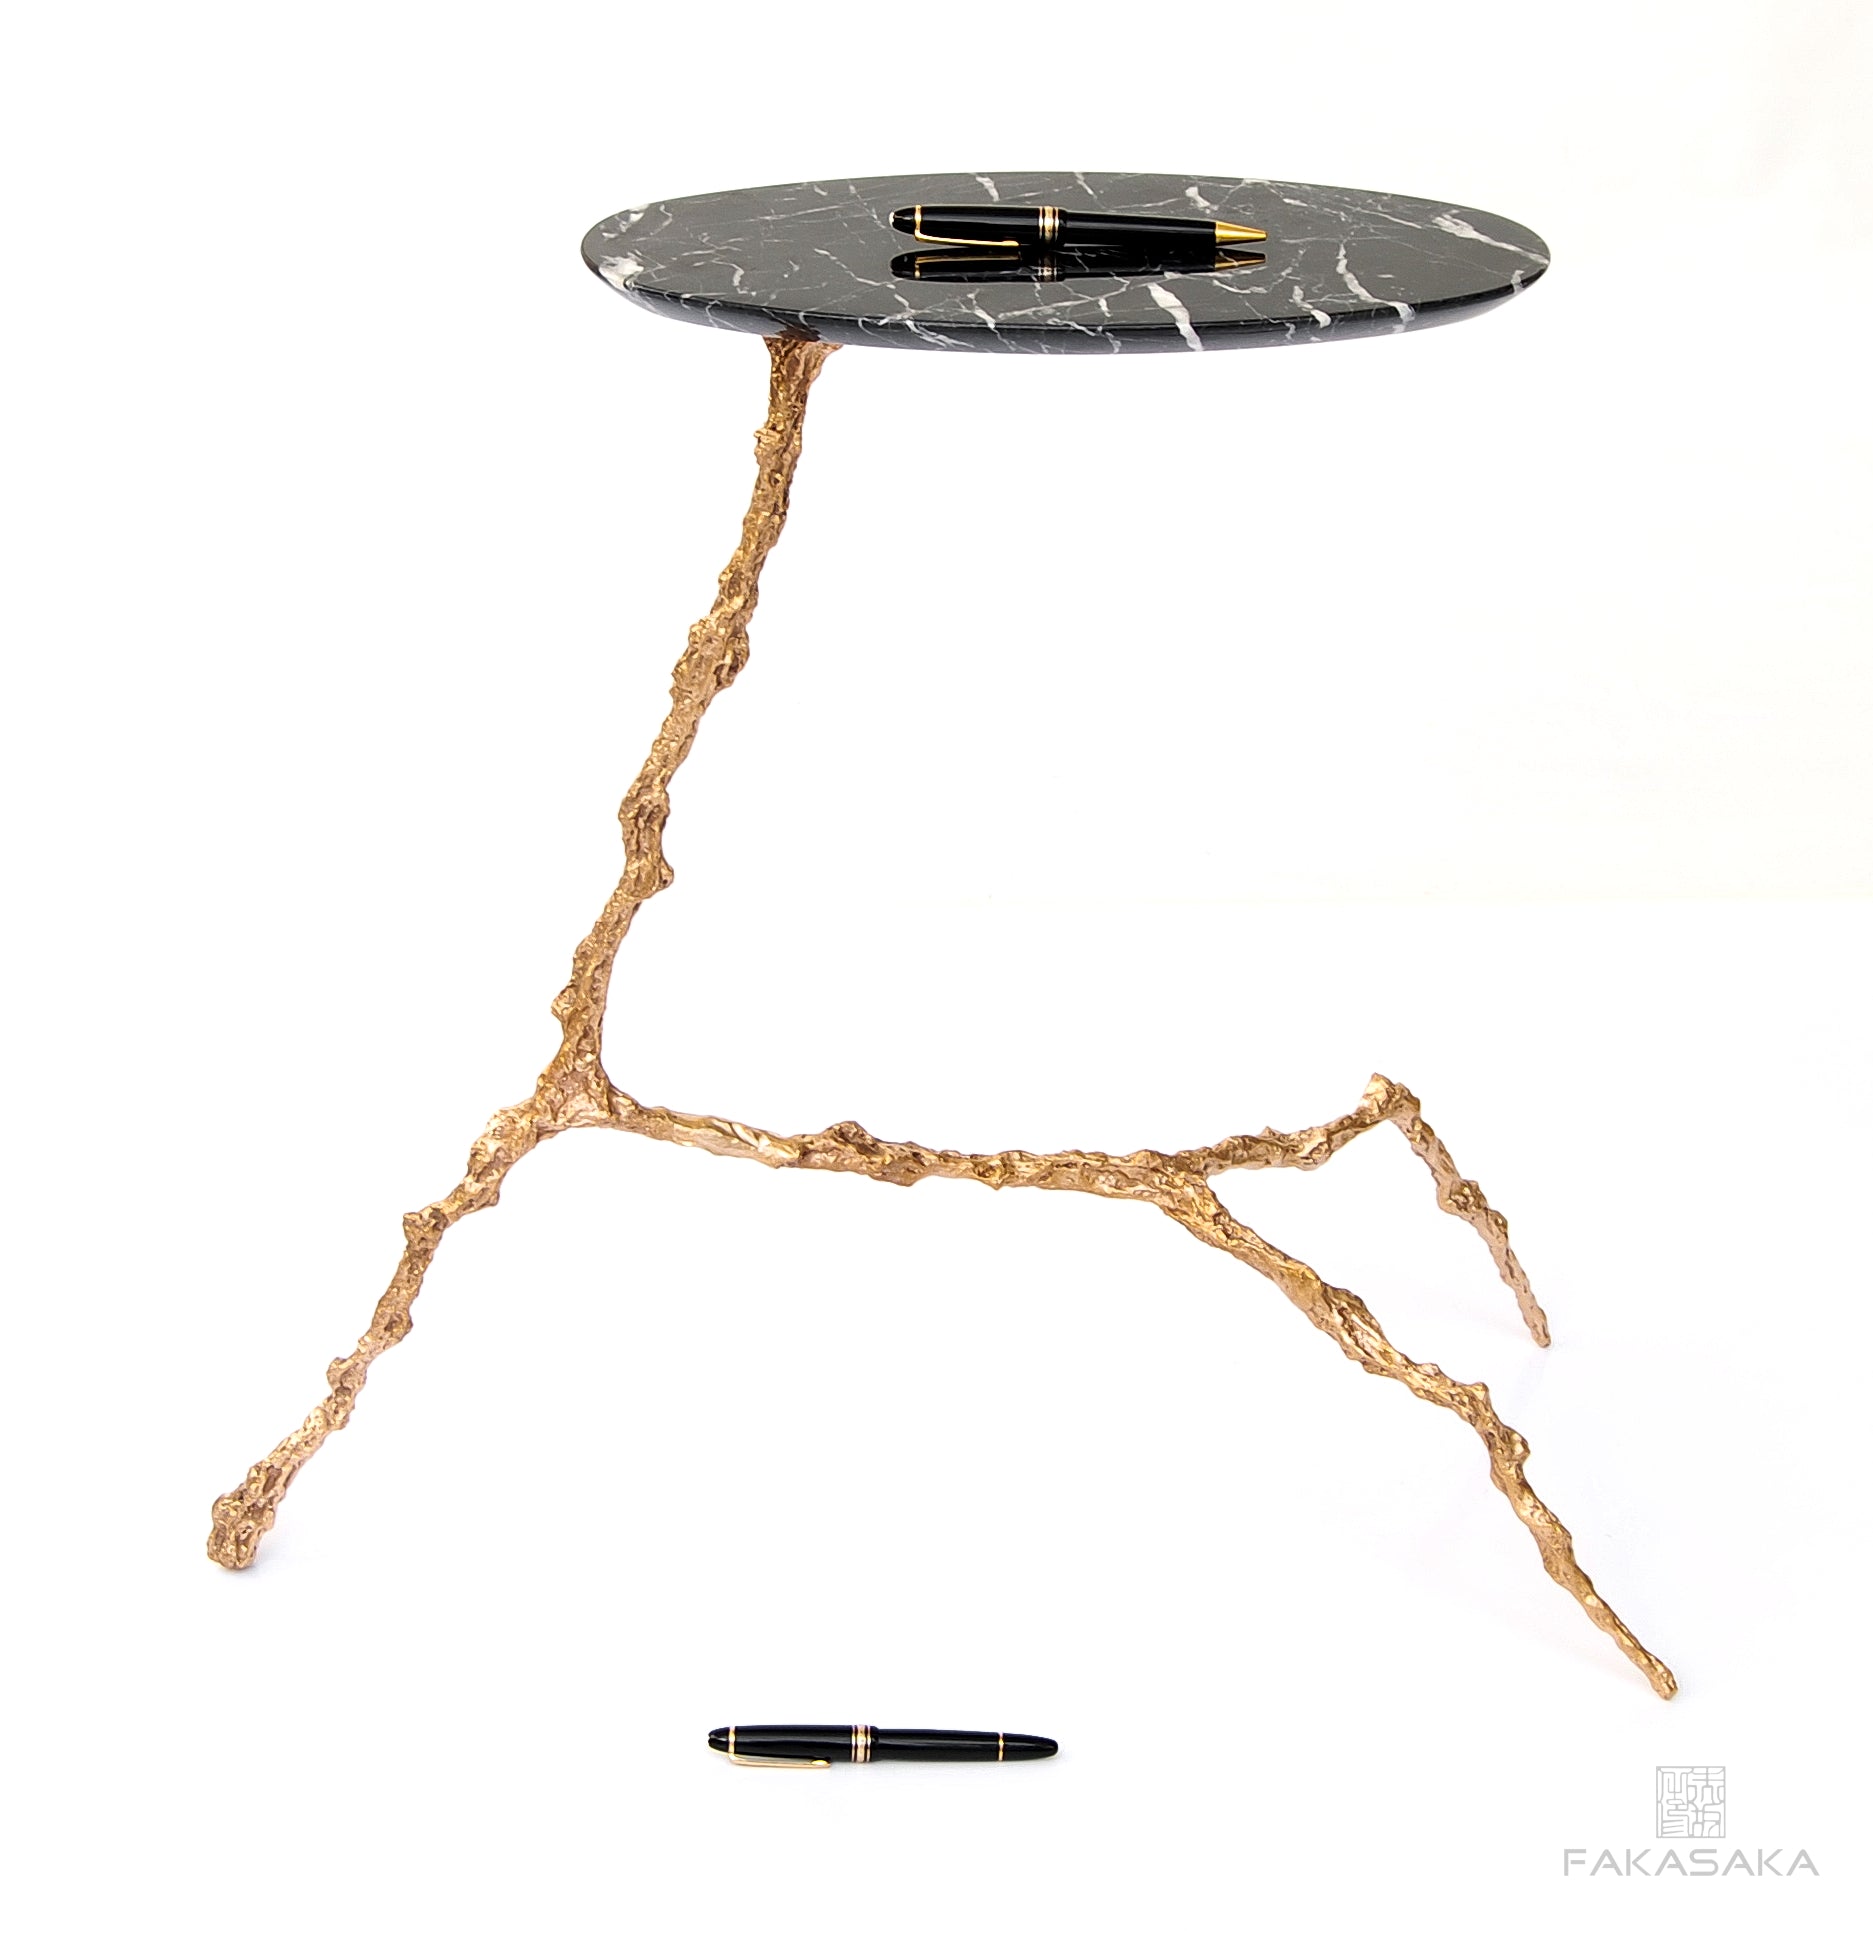 COHEN DRINK TABLE<br><br>NERO MARQUINA MARBLE<br>POLISHED BRONZE